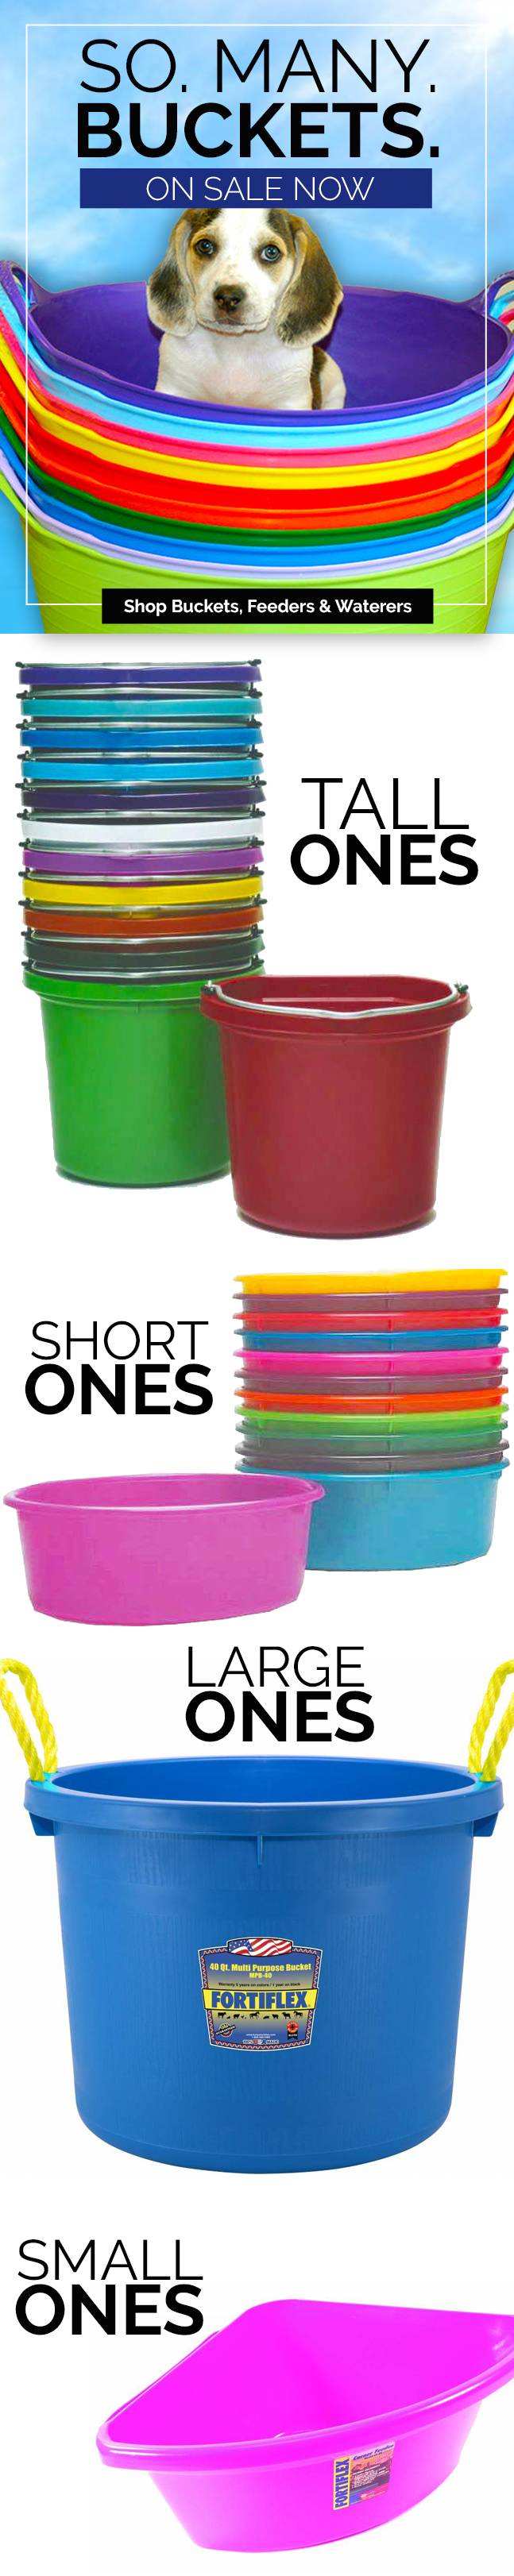 Now is the Time! Shop 100s of Buckets, Feeders & Waterers